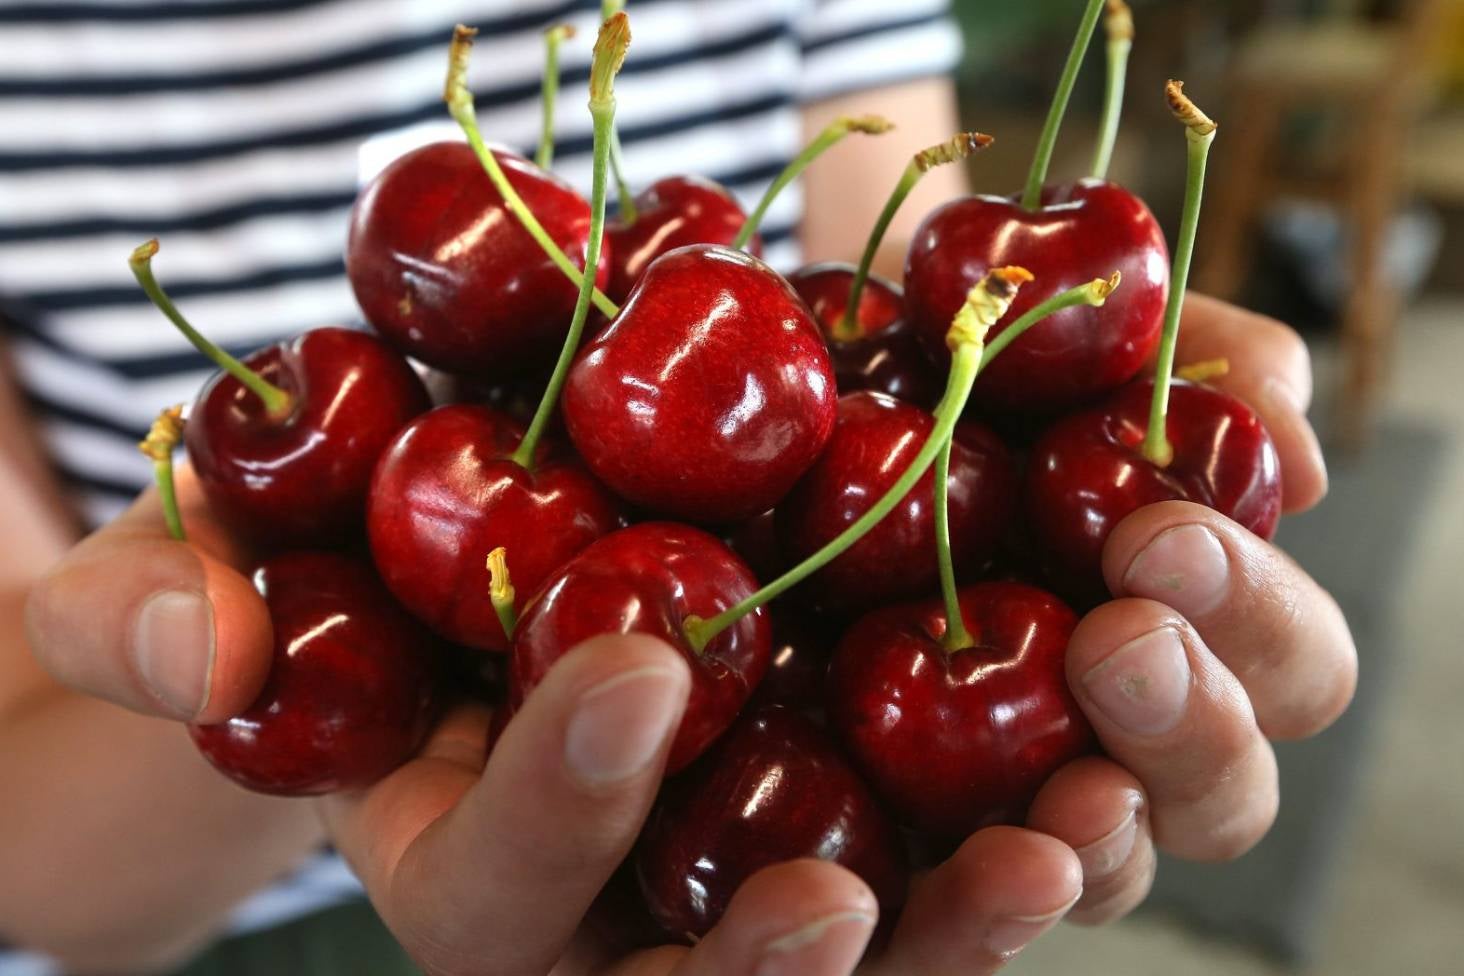 Woman Eats 50 Cherries In Few Hours, Experiences &Quot;Blood-Coloured&Quot; Poop &Amp; Faints In Toilet - World Of Buzz 1